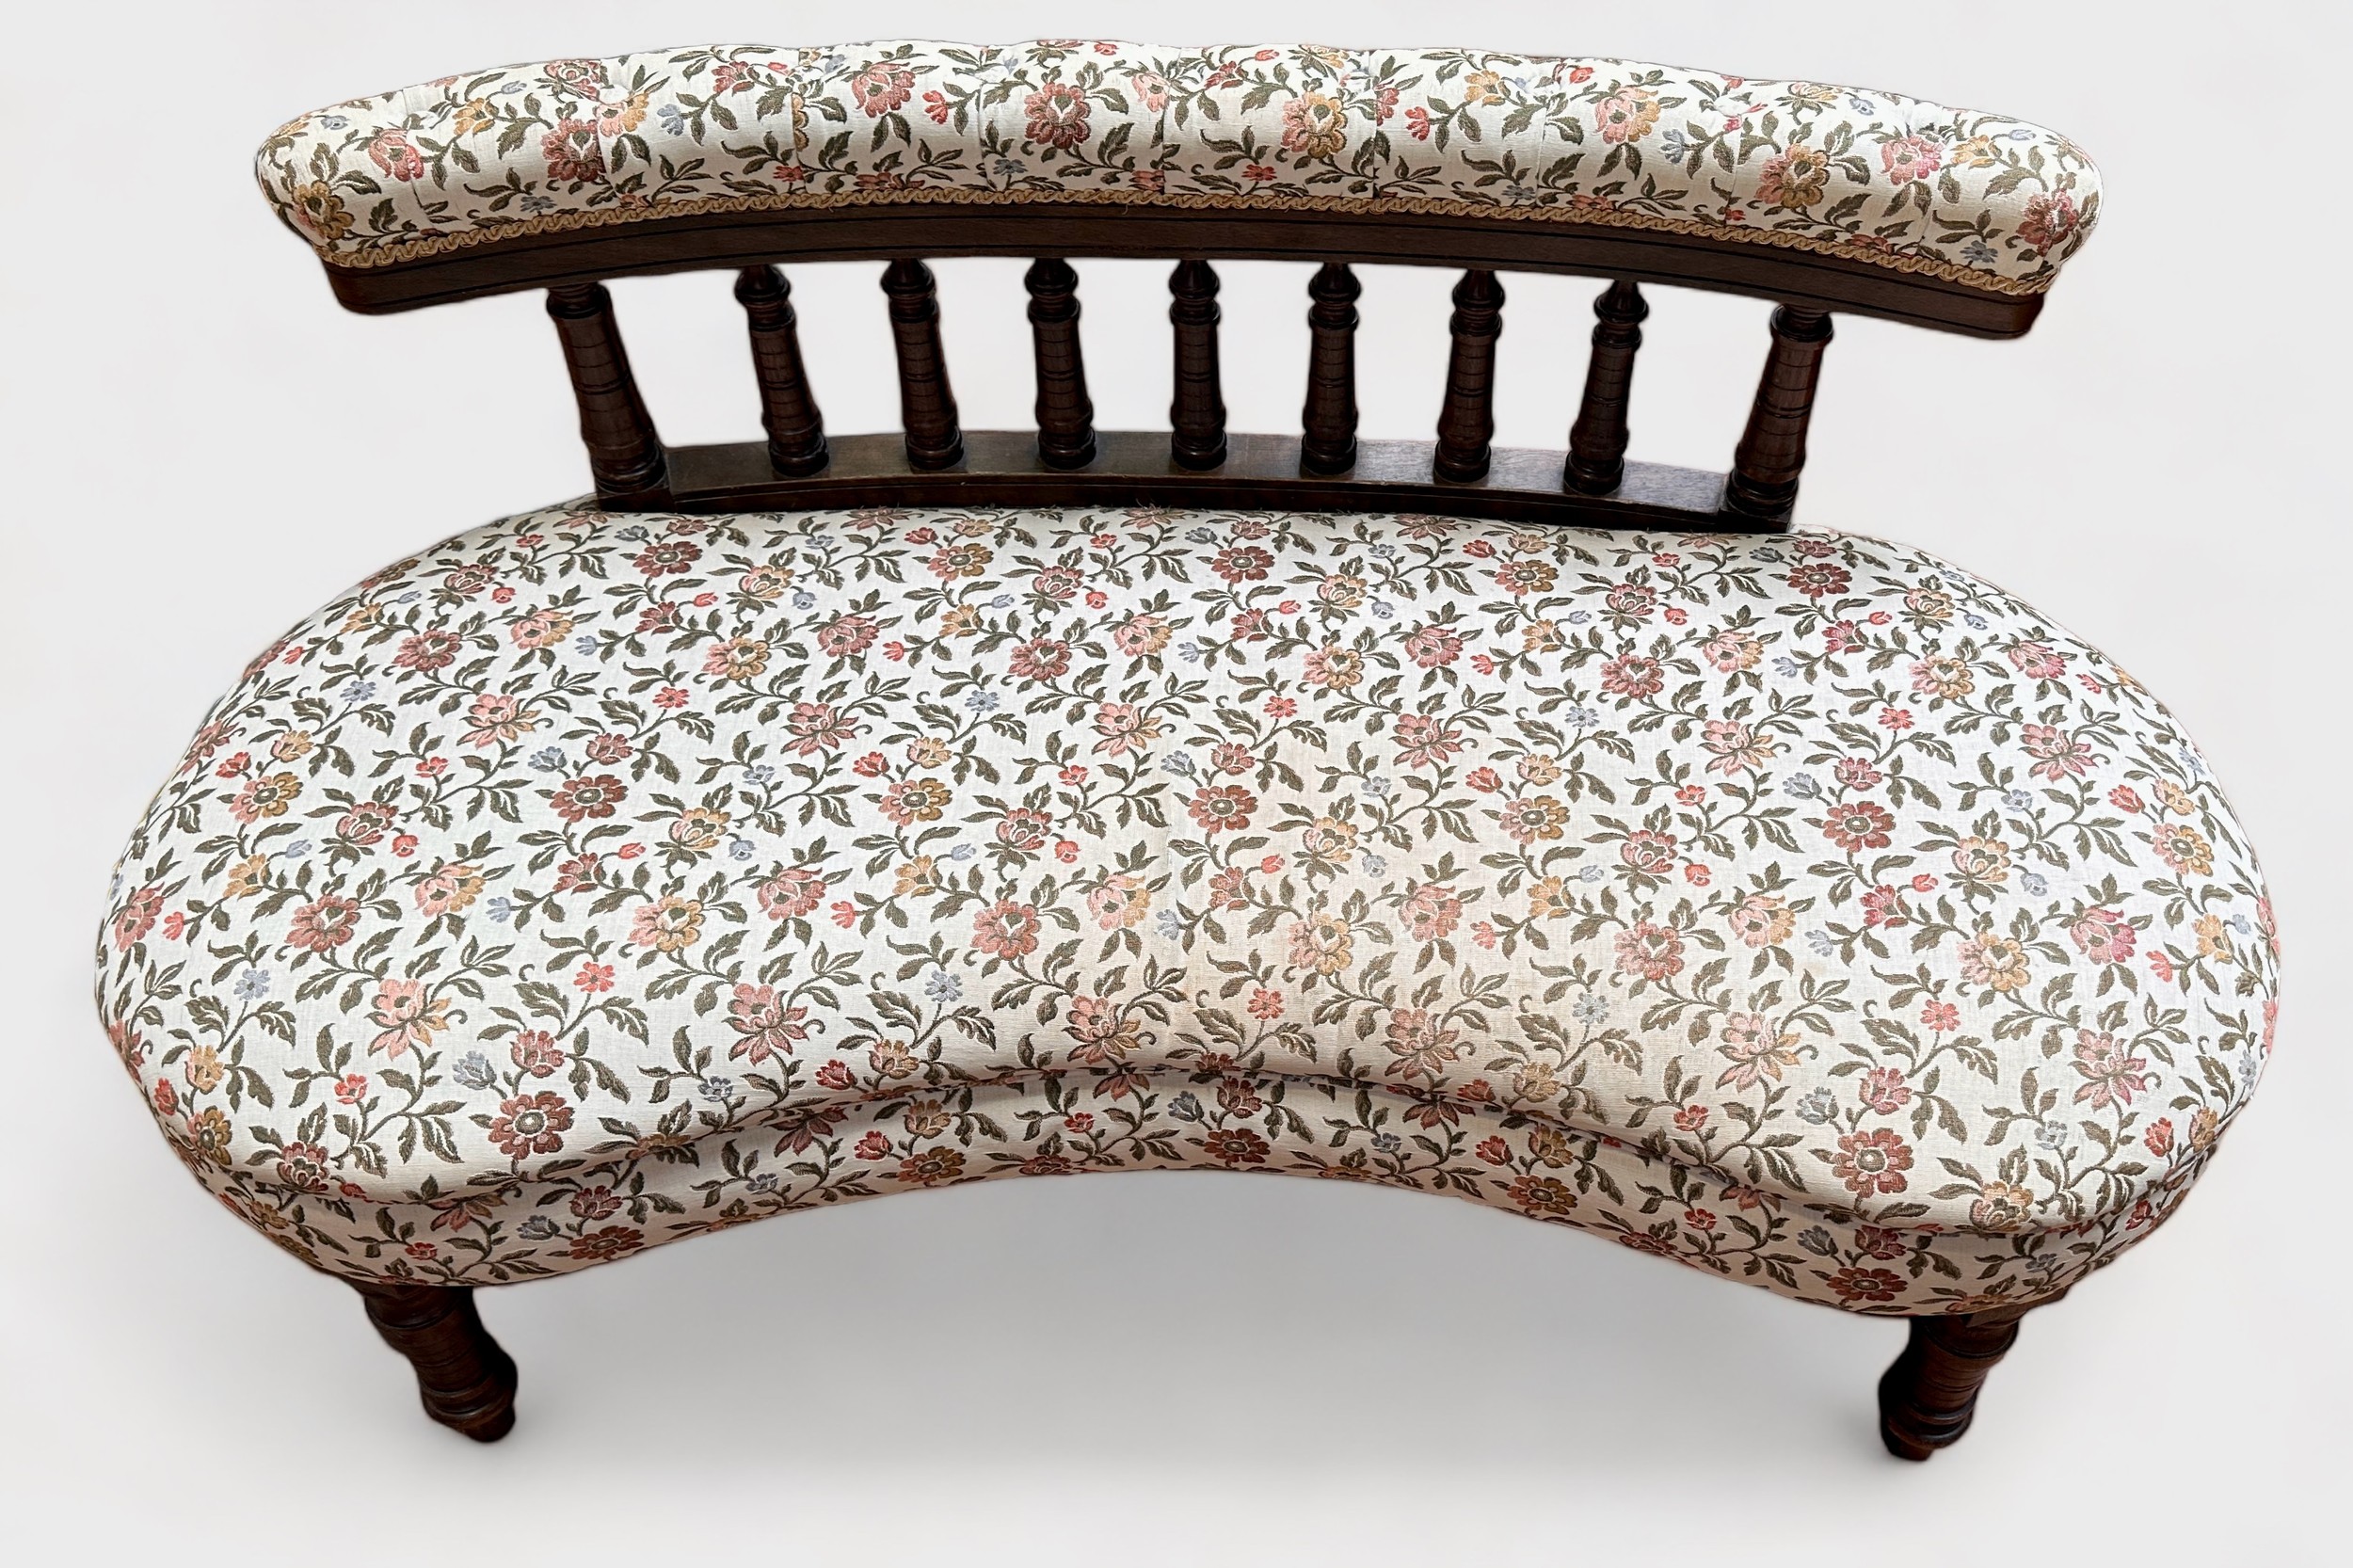 An Edwardian kidney-shaped parlour sofa, with bobbin spindle back and floral cream upholstered